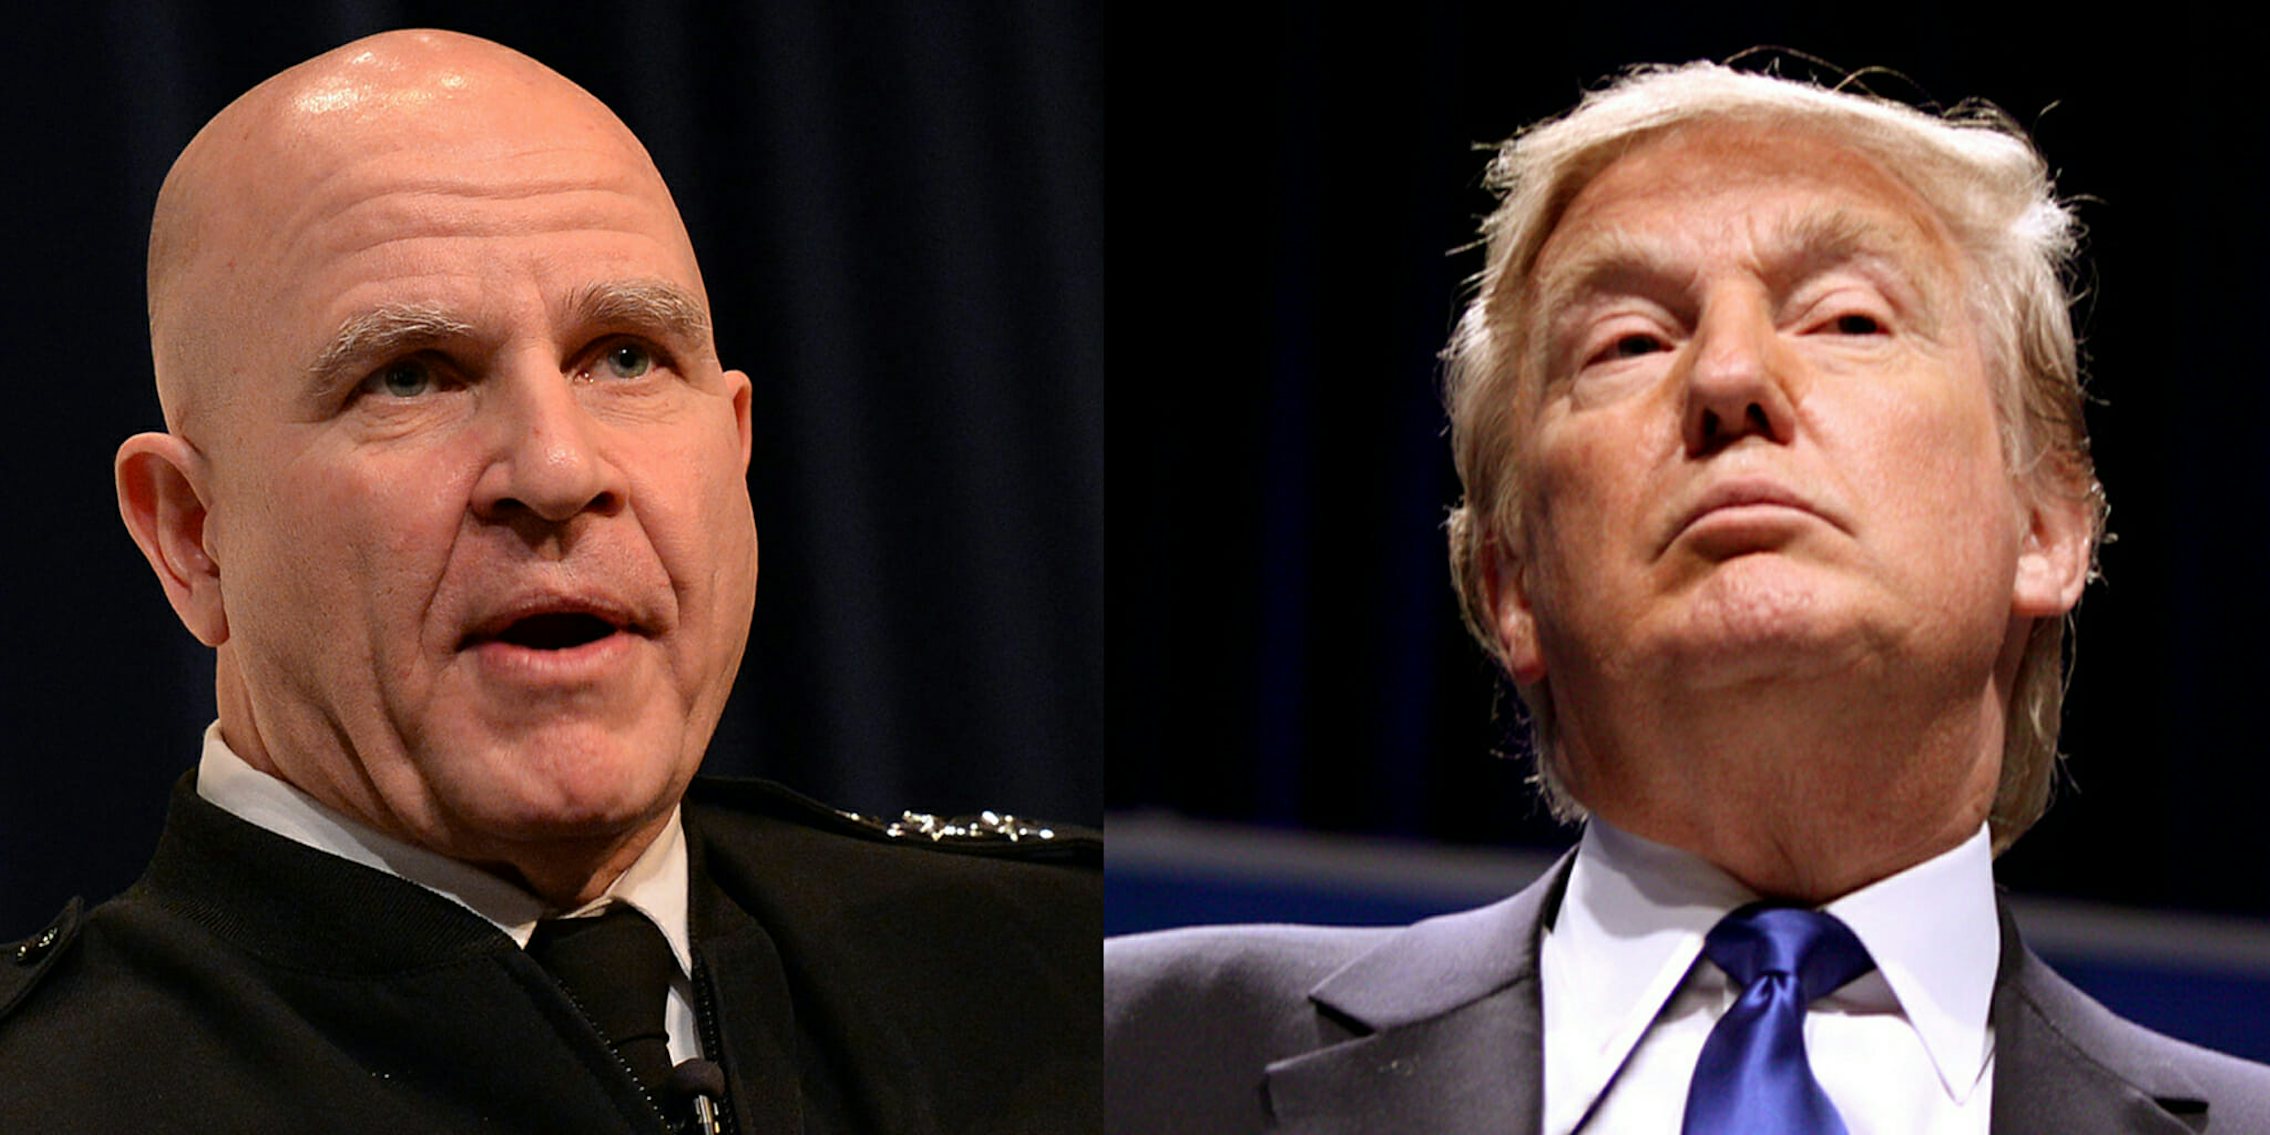 A new memo from H.R. McMaster warns the federal government that leaks will not be tolerated.